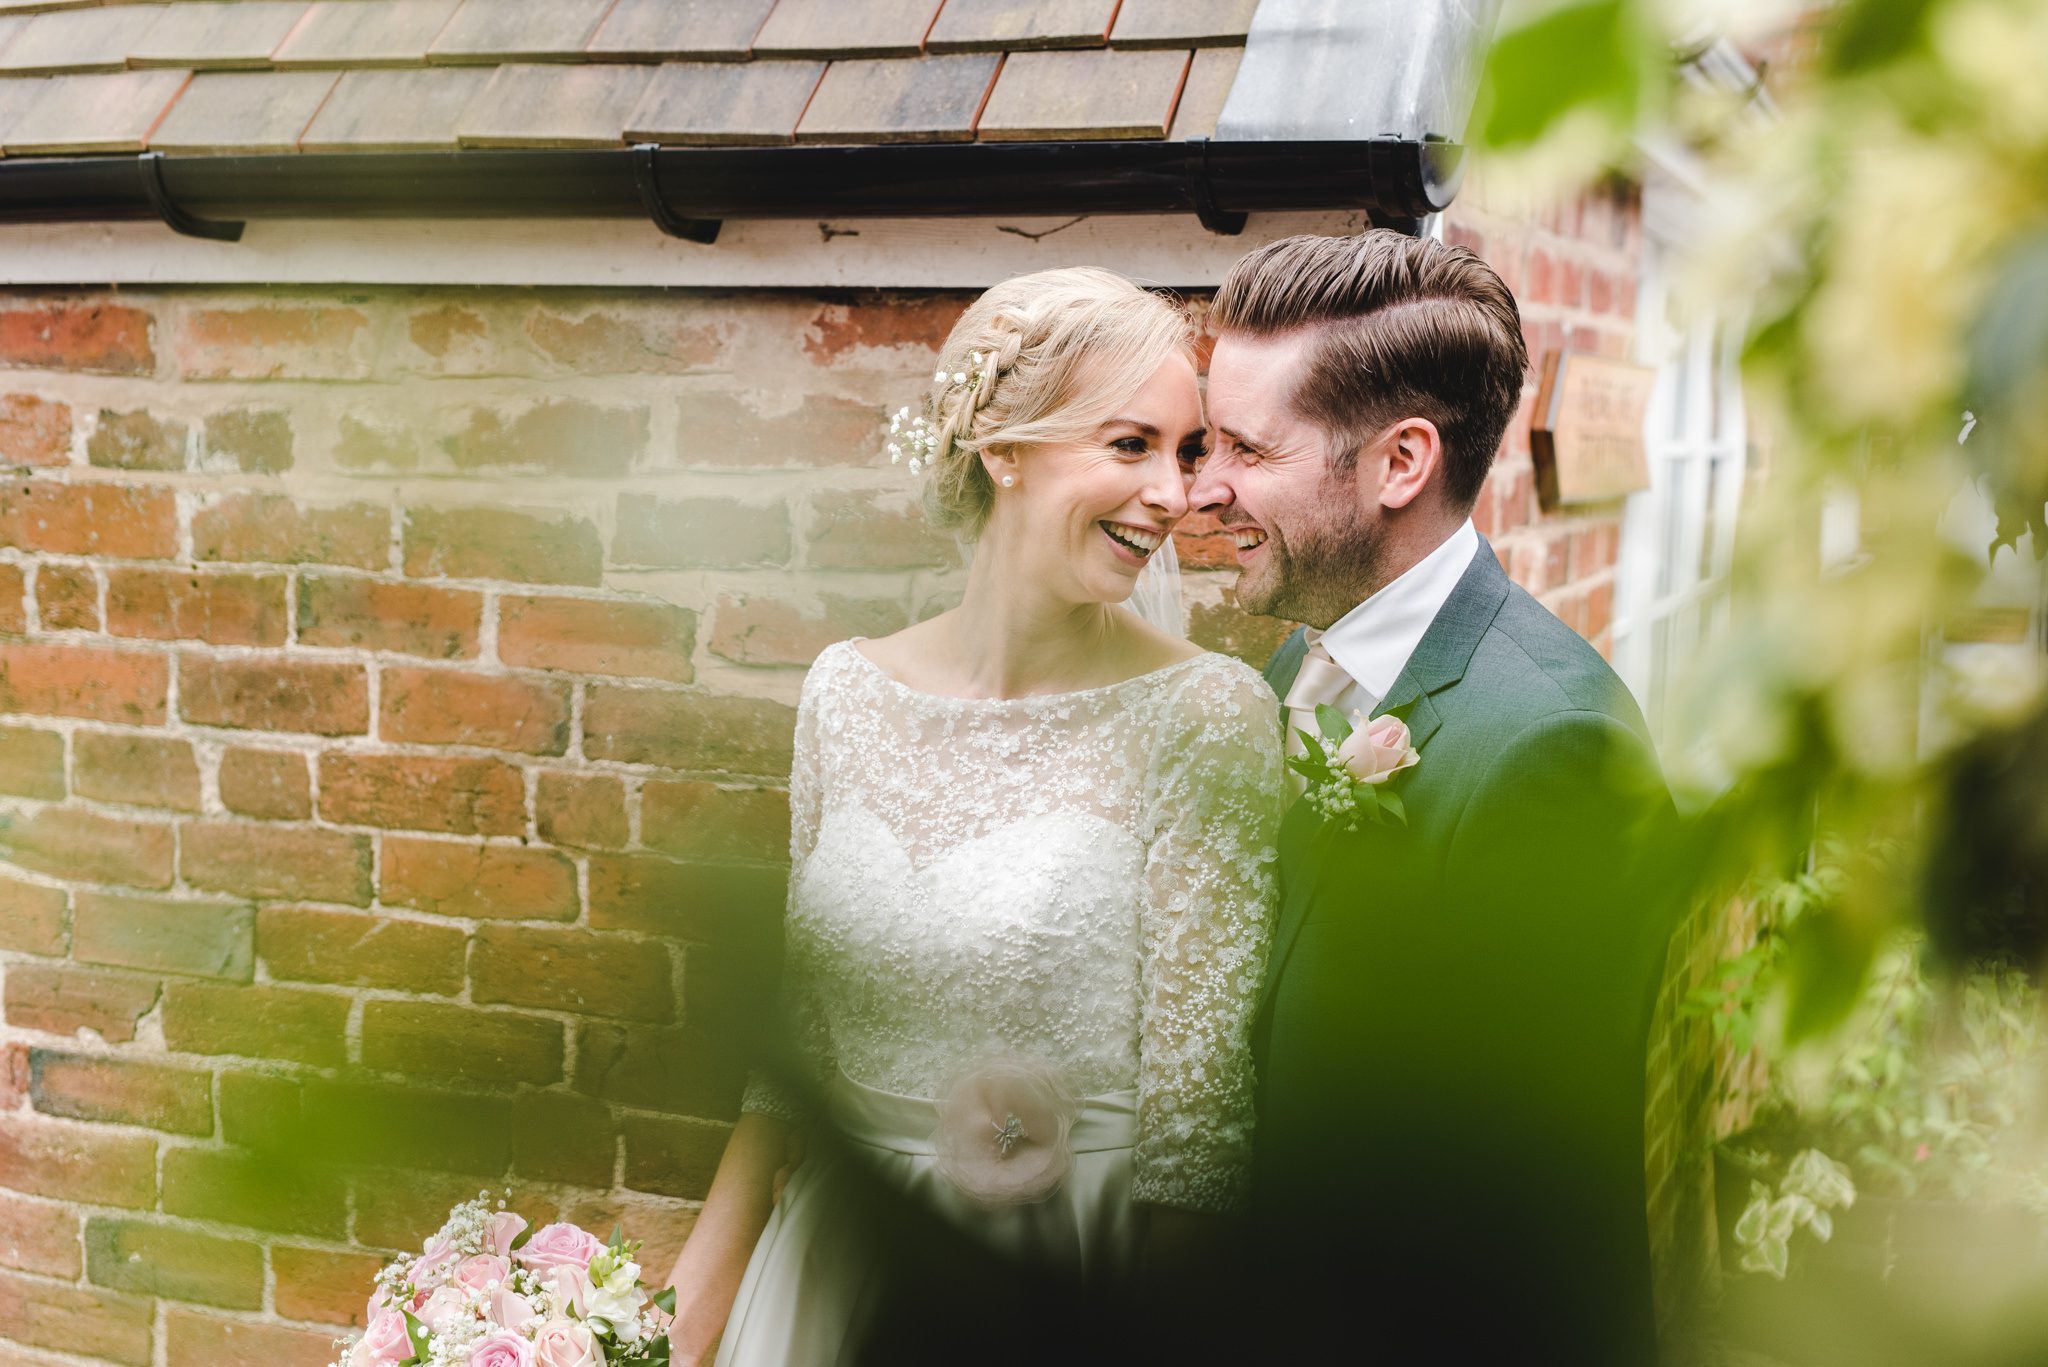 A couple smiling at each other during their wedding photographs at Curradine Barns